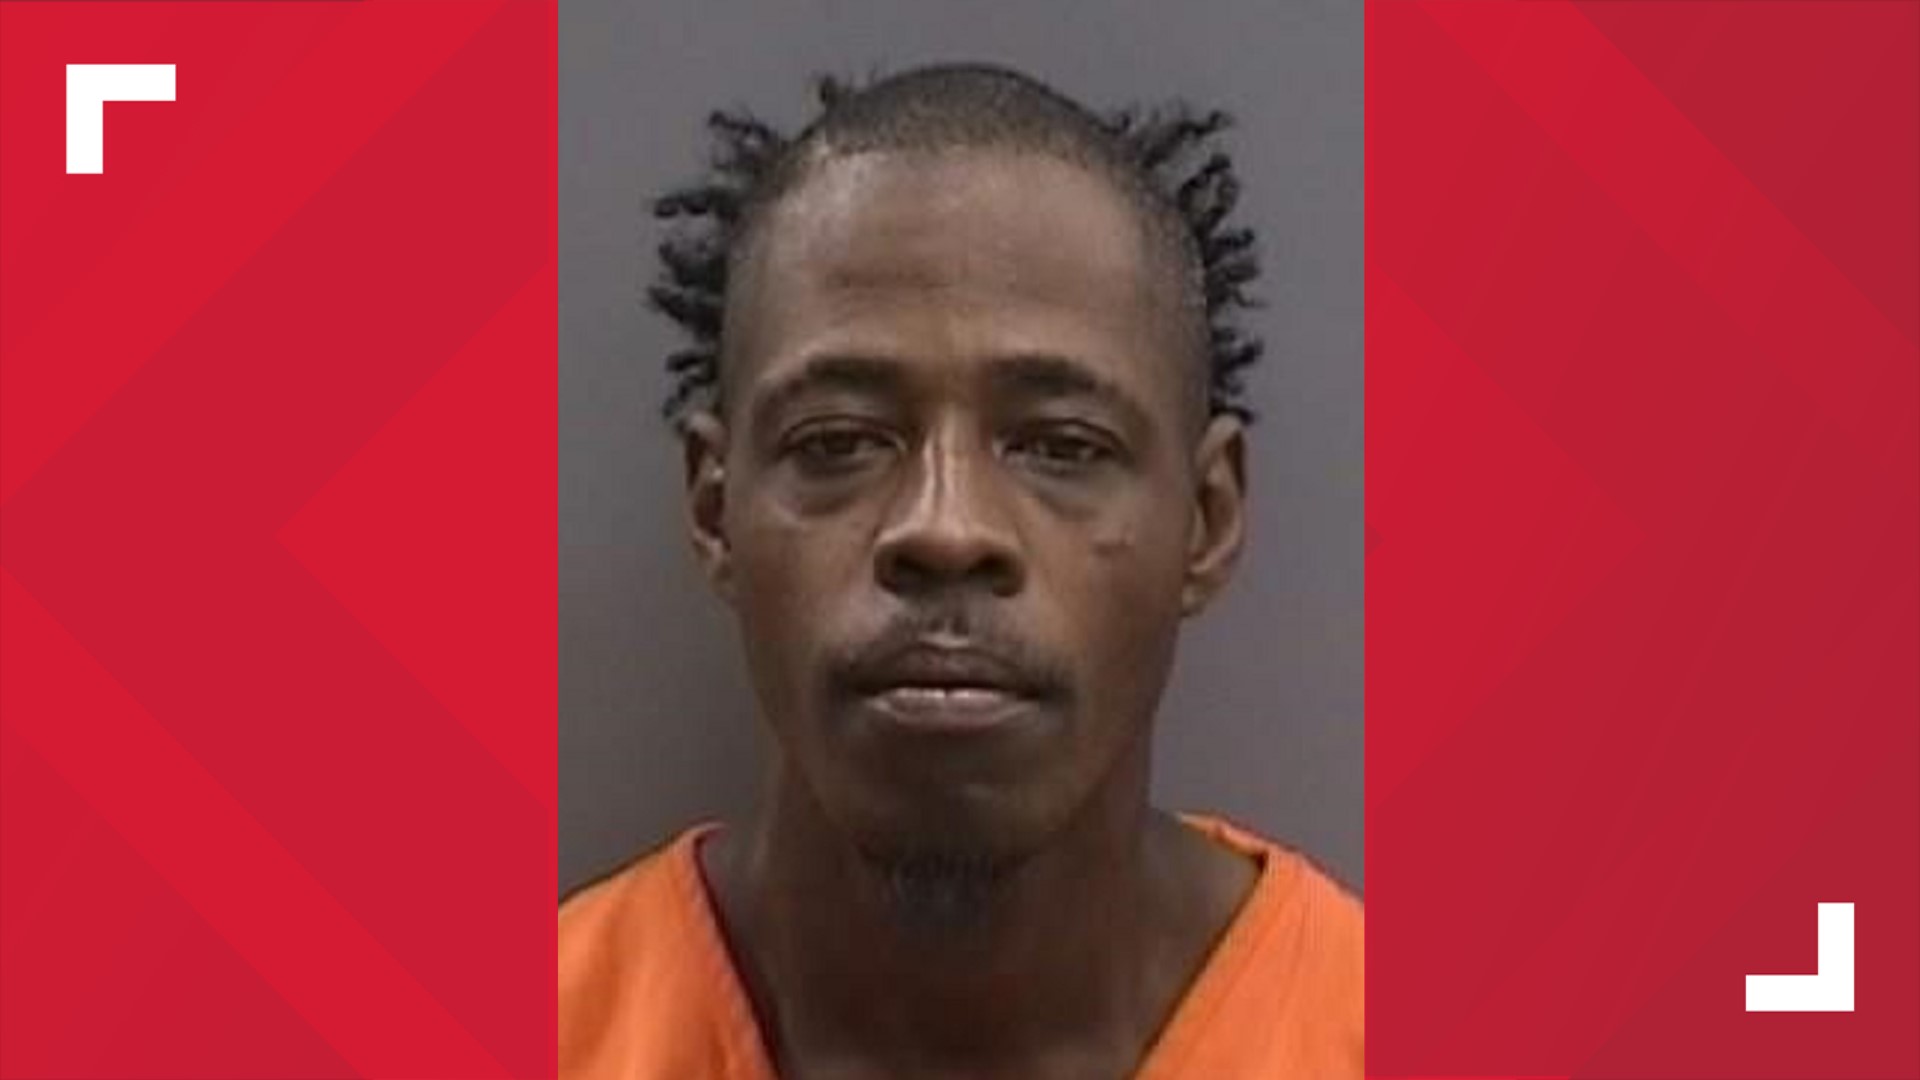 Hyson Williams was charged with petit theft and burglary of an unoccupied dwelling.